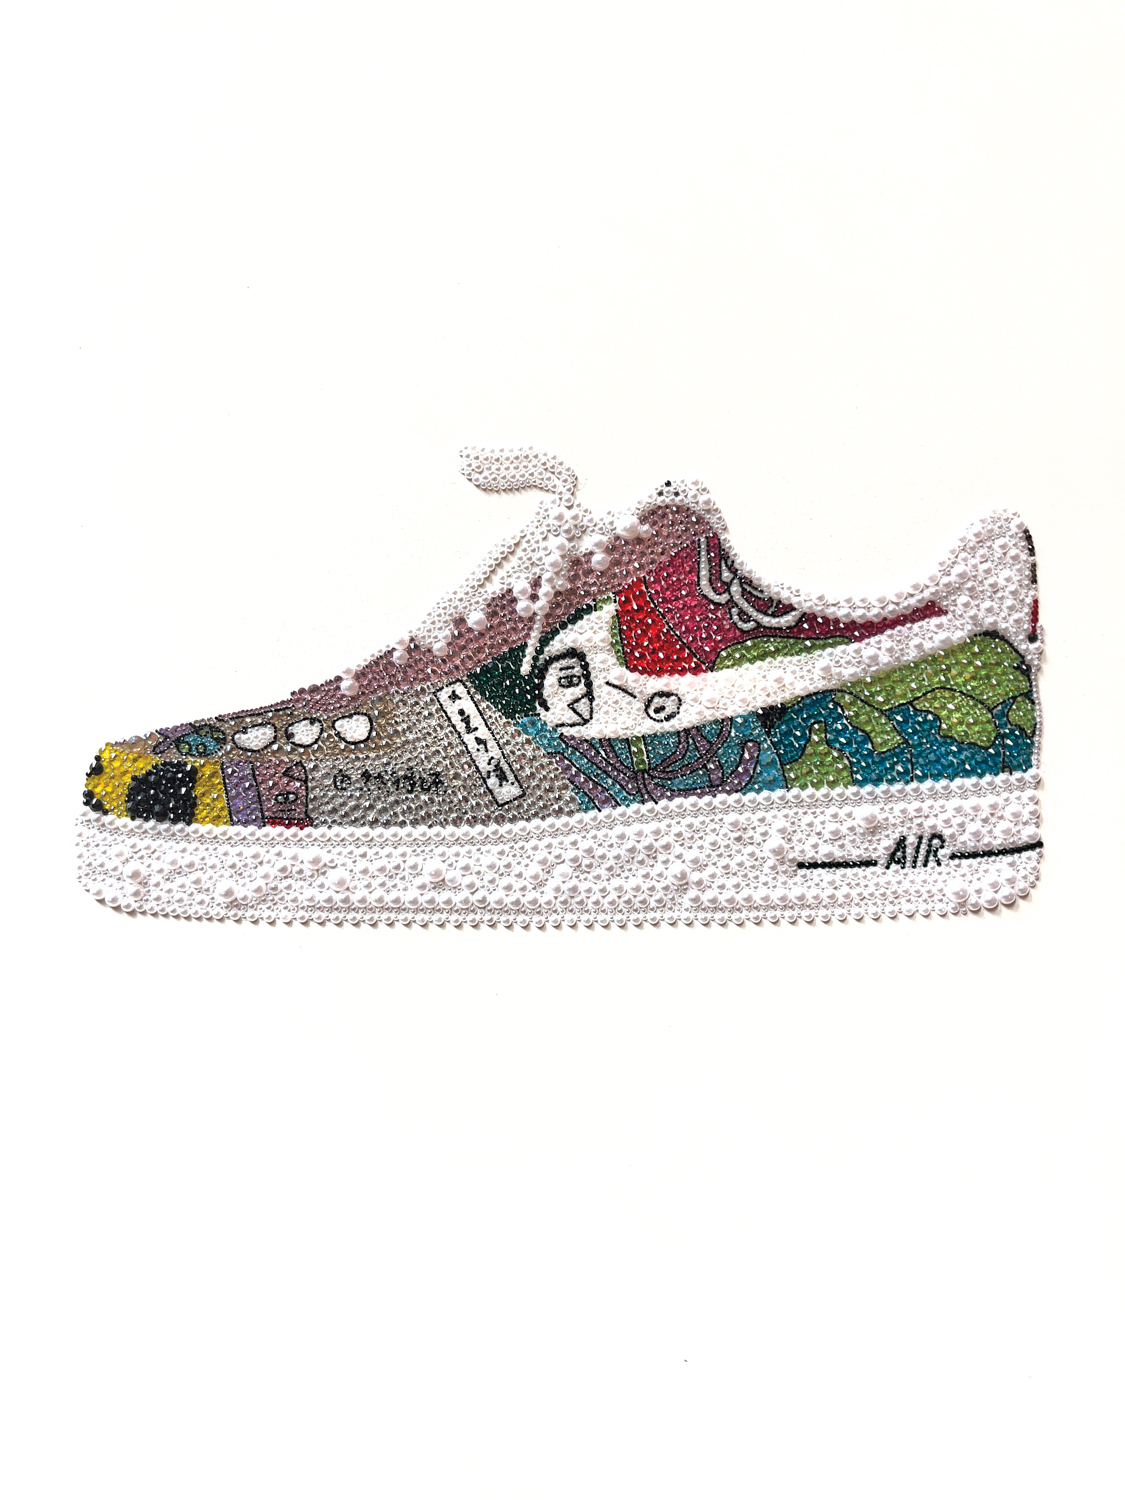 Sneaker made of thousands of rhinestones, crystals and pearls with a Nike swoop by Stef Ross